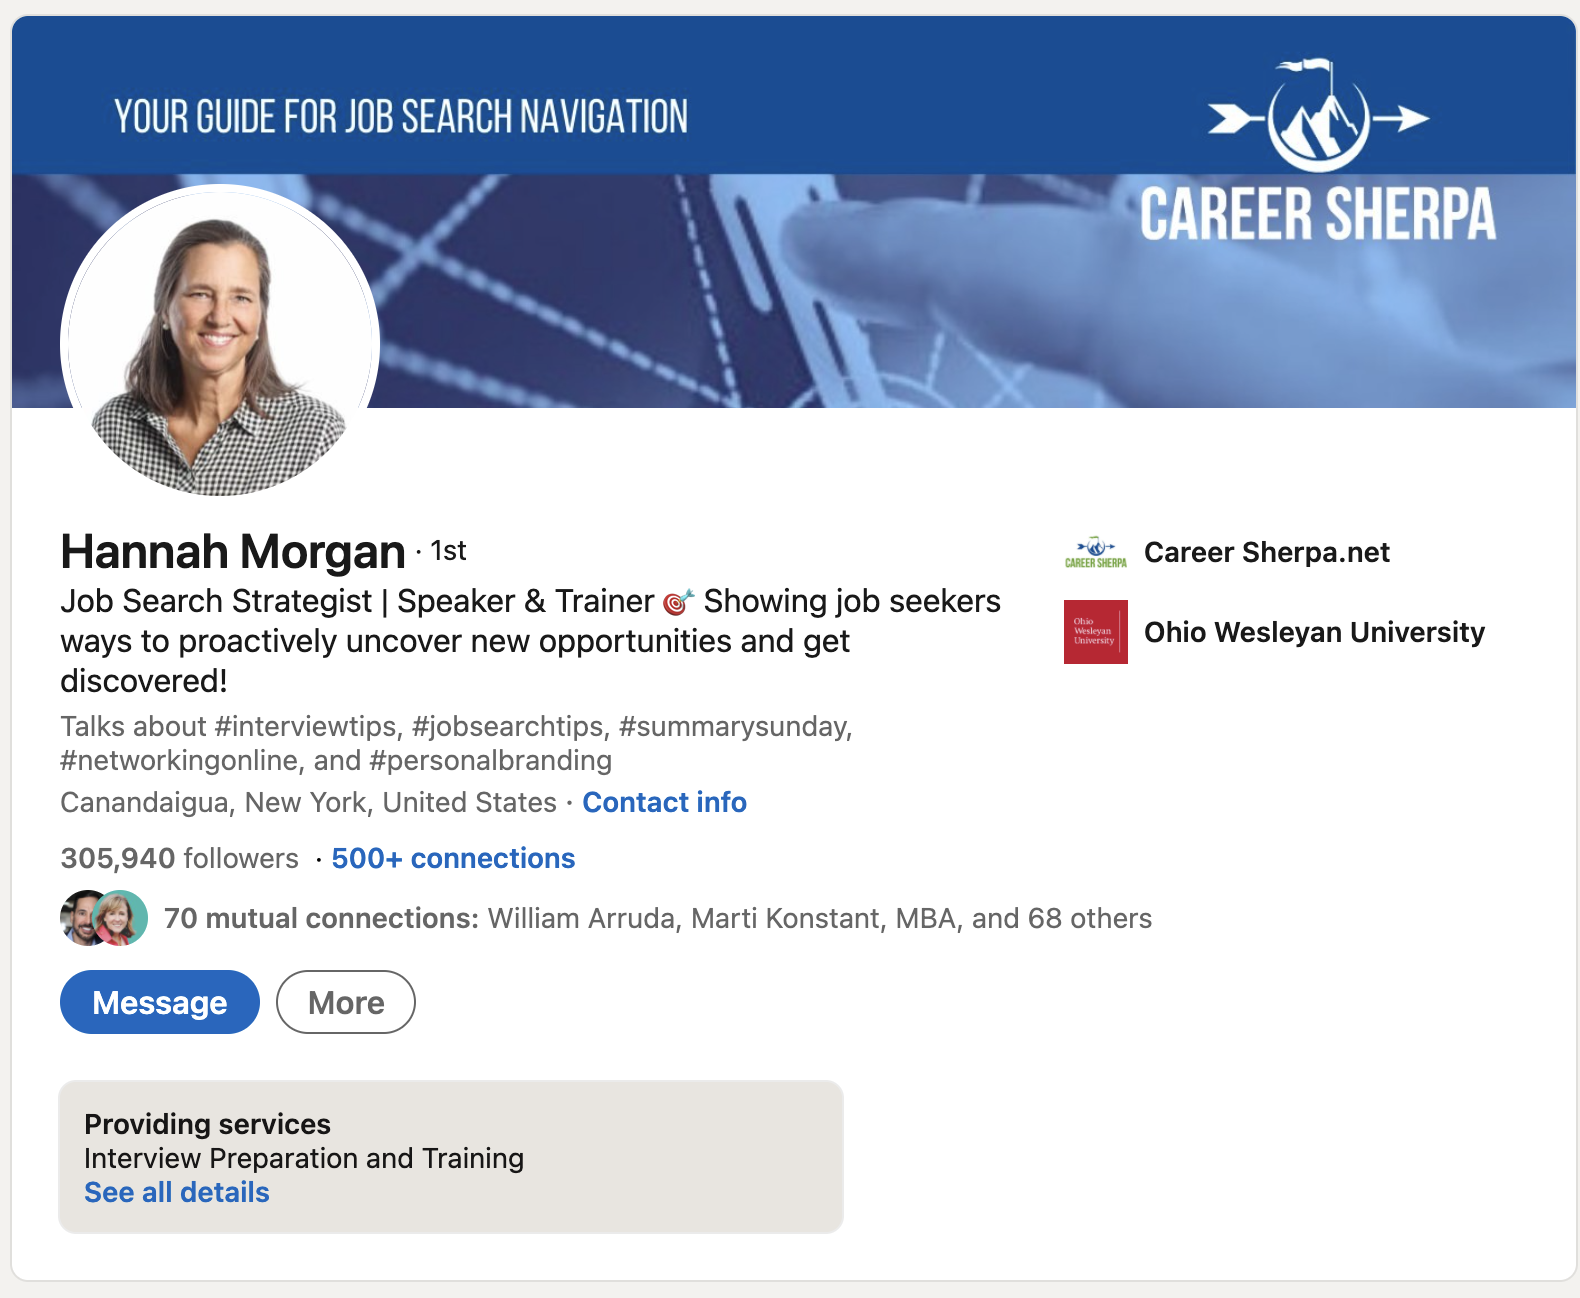 How to Craft an Outstanding LinkedIn Profile as an Older Professional